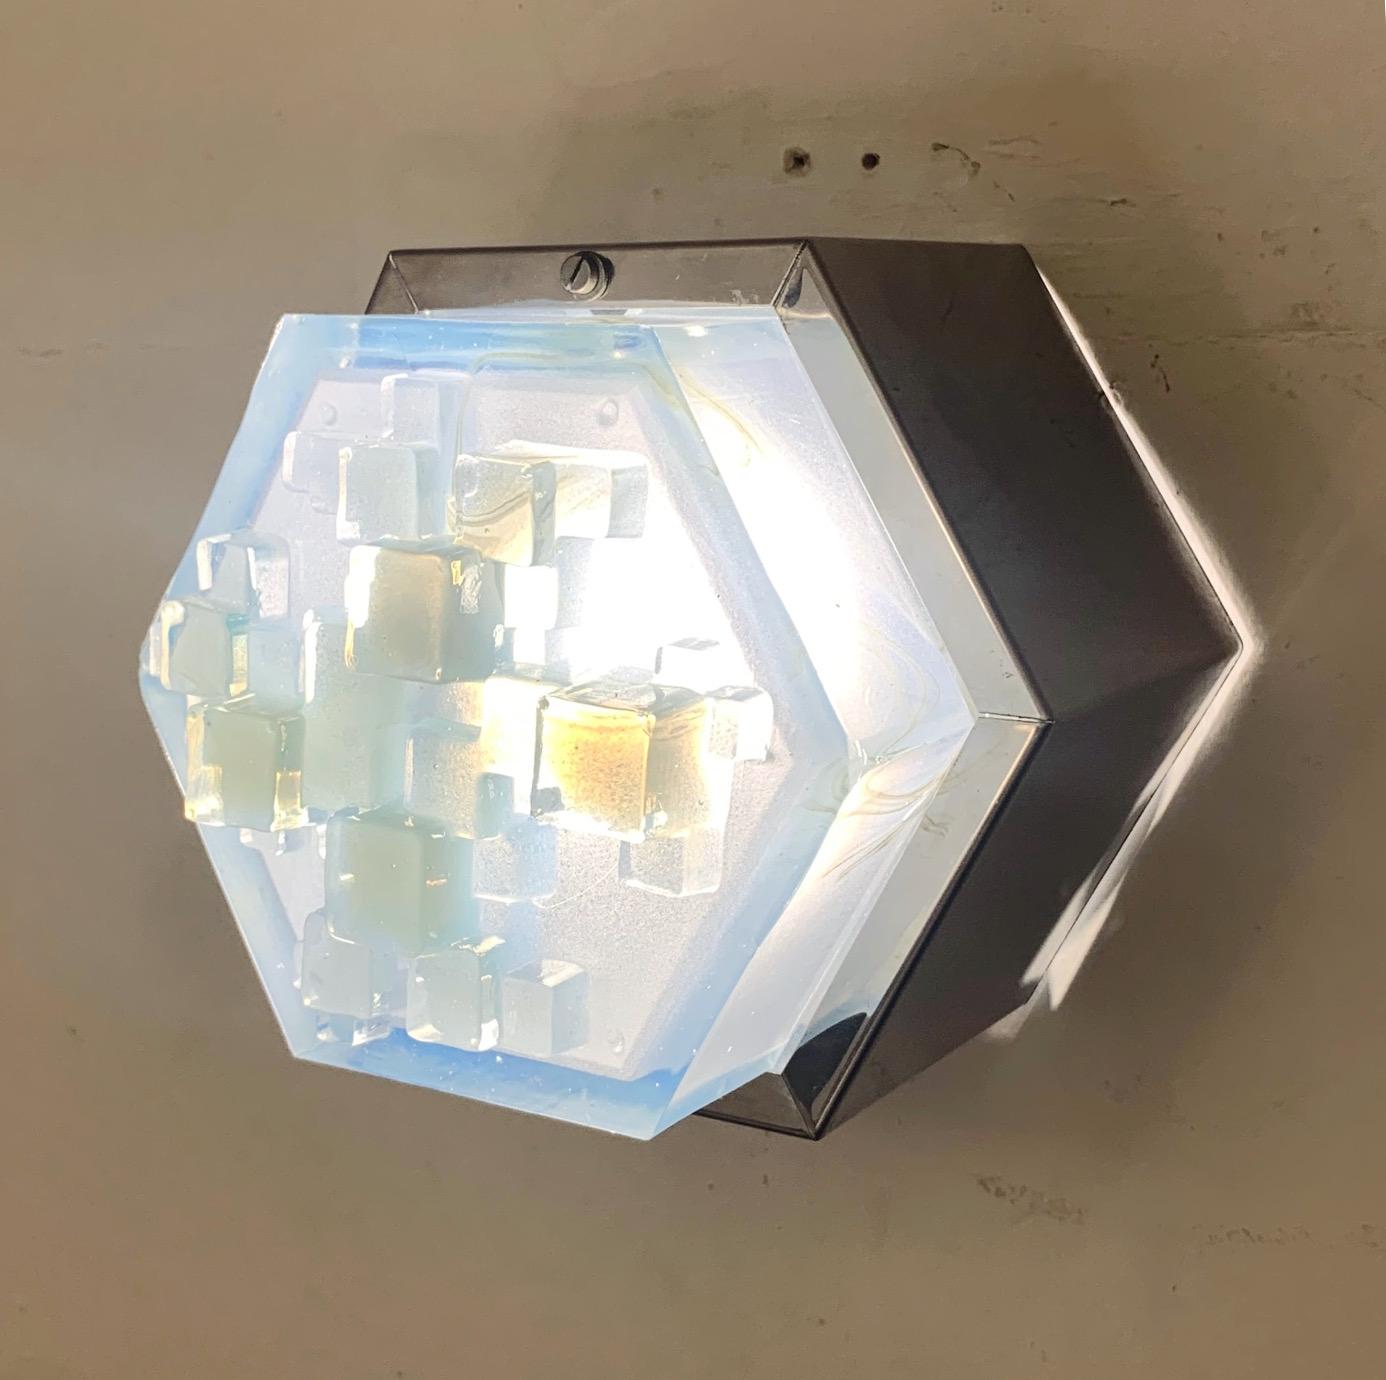 Hexagonal Modular Sconces / Flush Mounts by Poliarte - 3 available In Good Condition For Sale In Los Angeles, CA